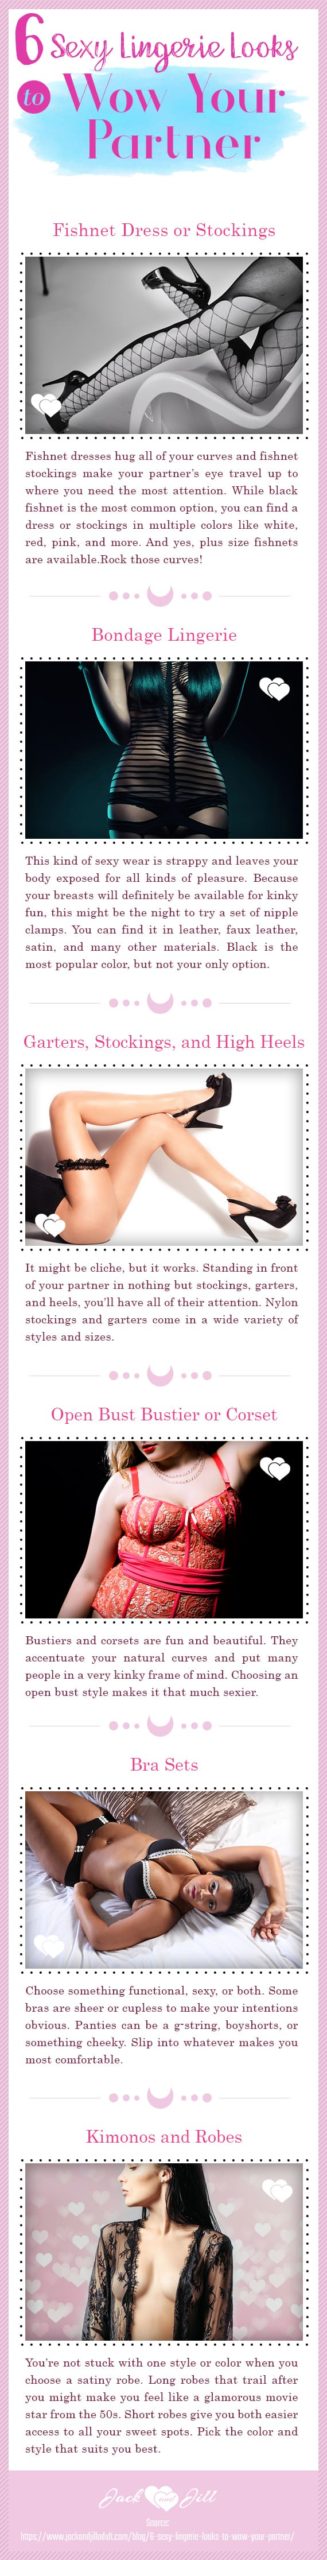 Infographic for 6 Sexy Lingerie Looks to Wow Your Partner